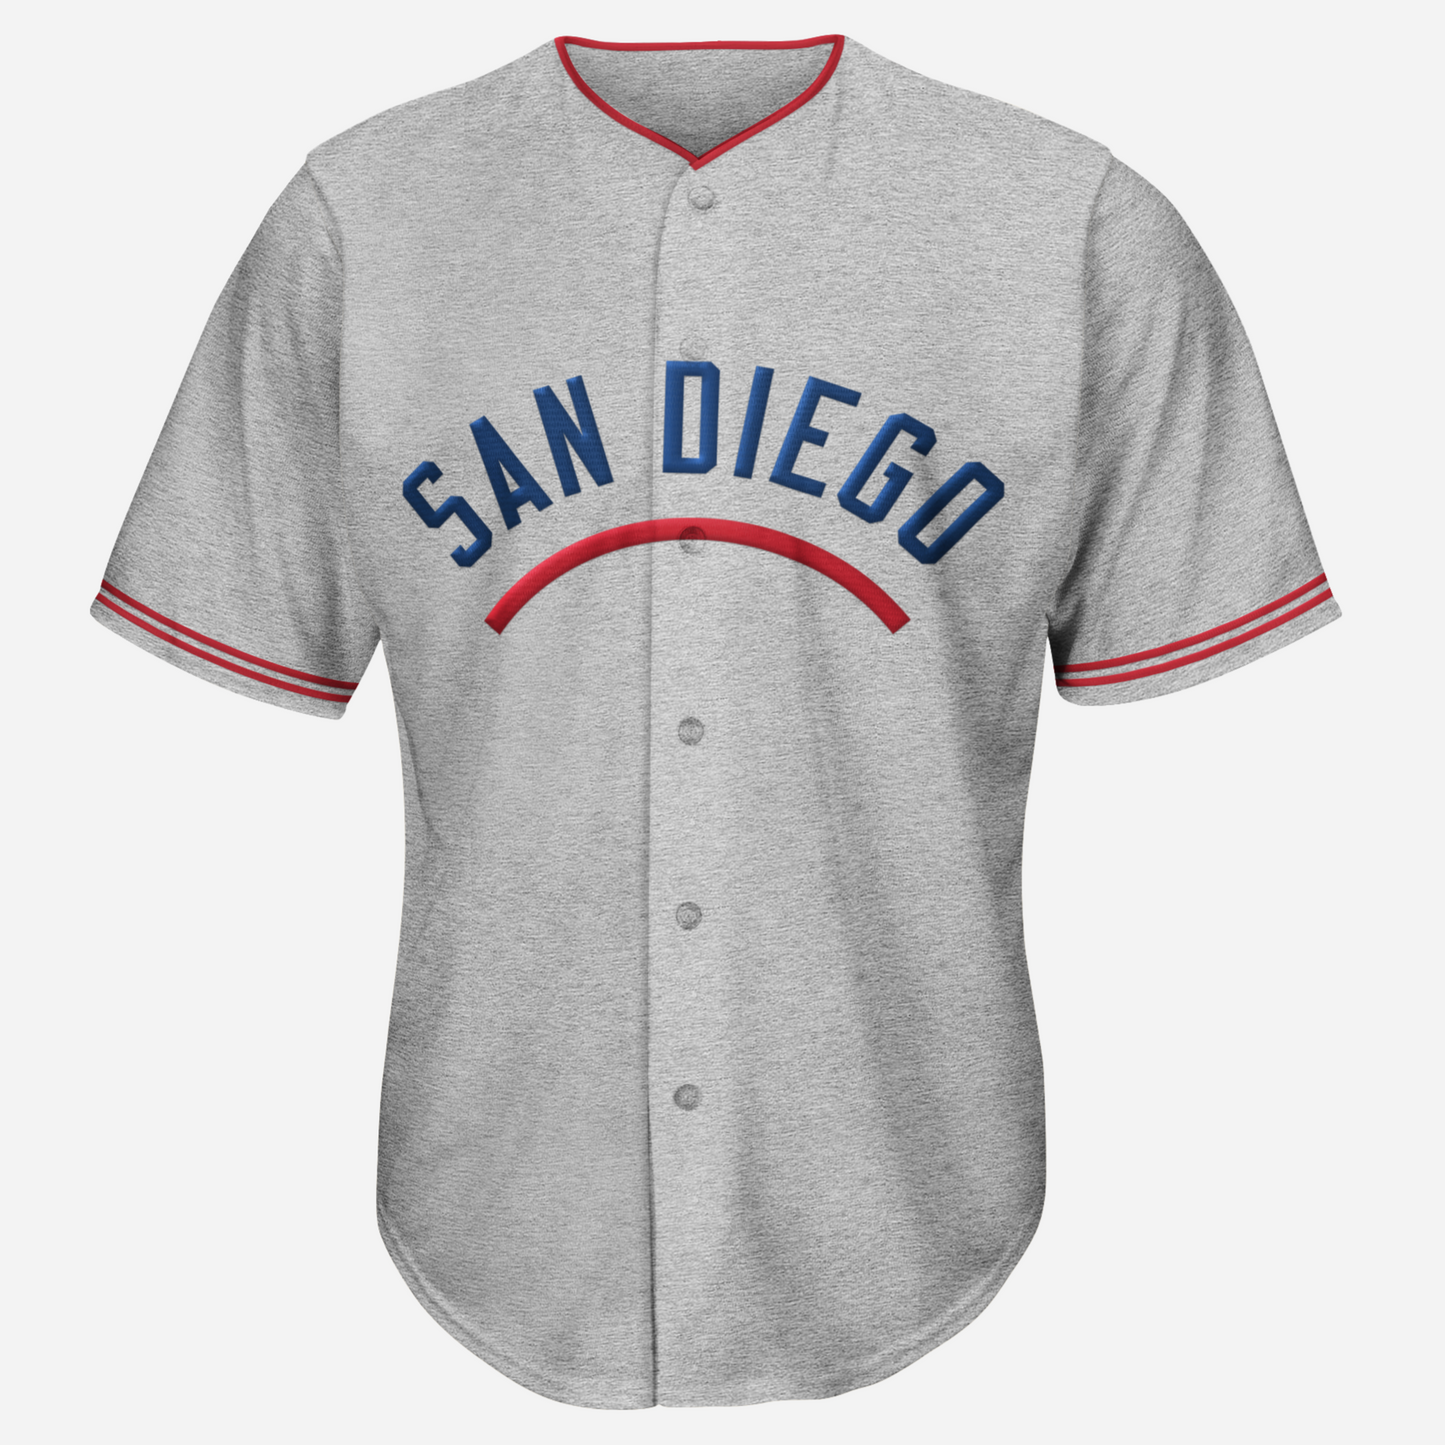 padres gray jersey